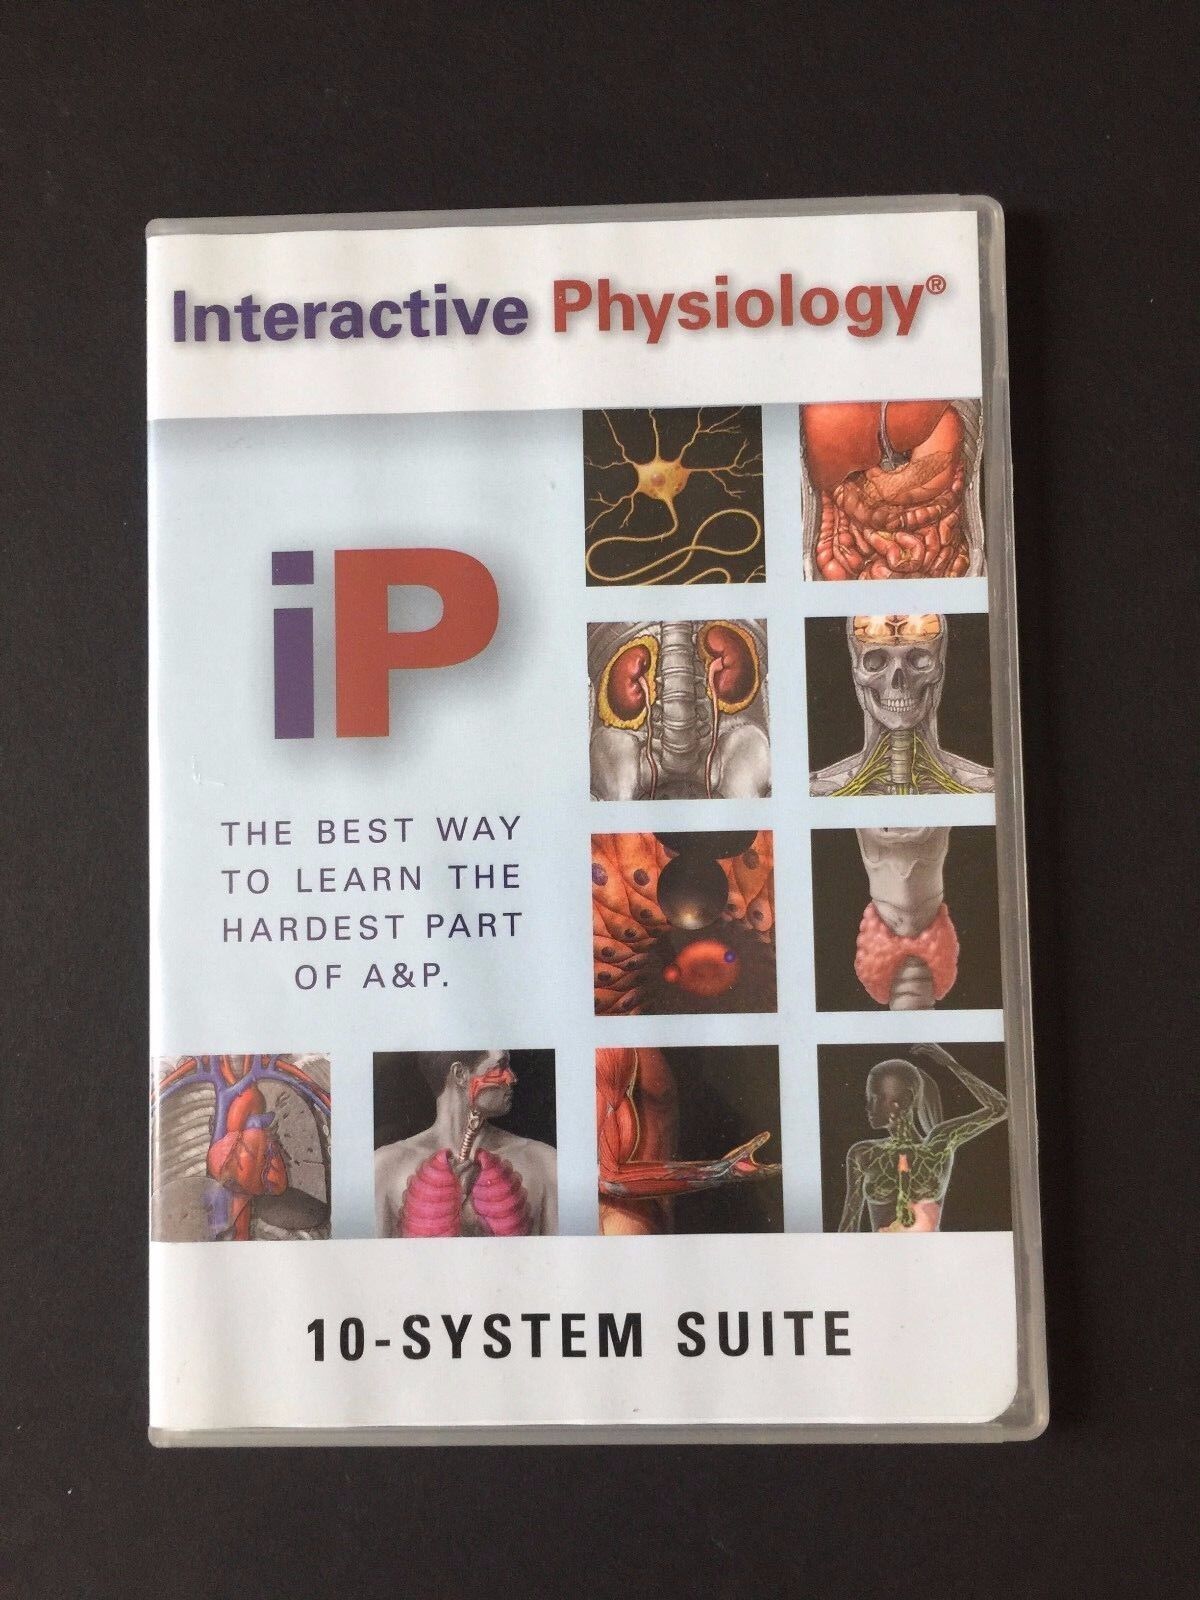 Interactive Physiology Anatomy Pearson 10-System Suite CD Anatomy and Physiology